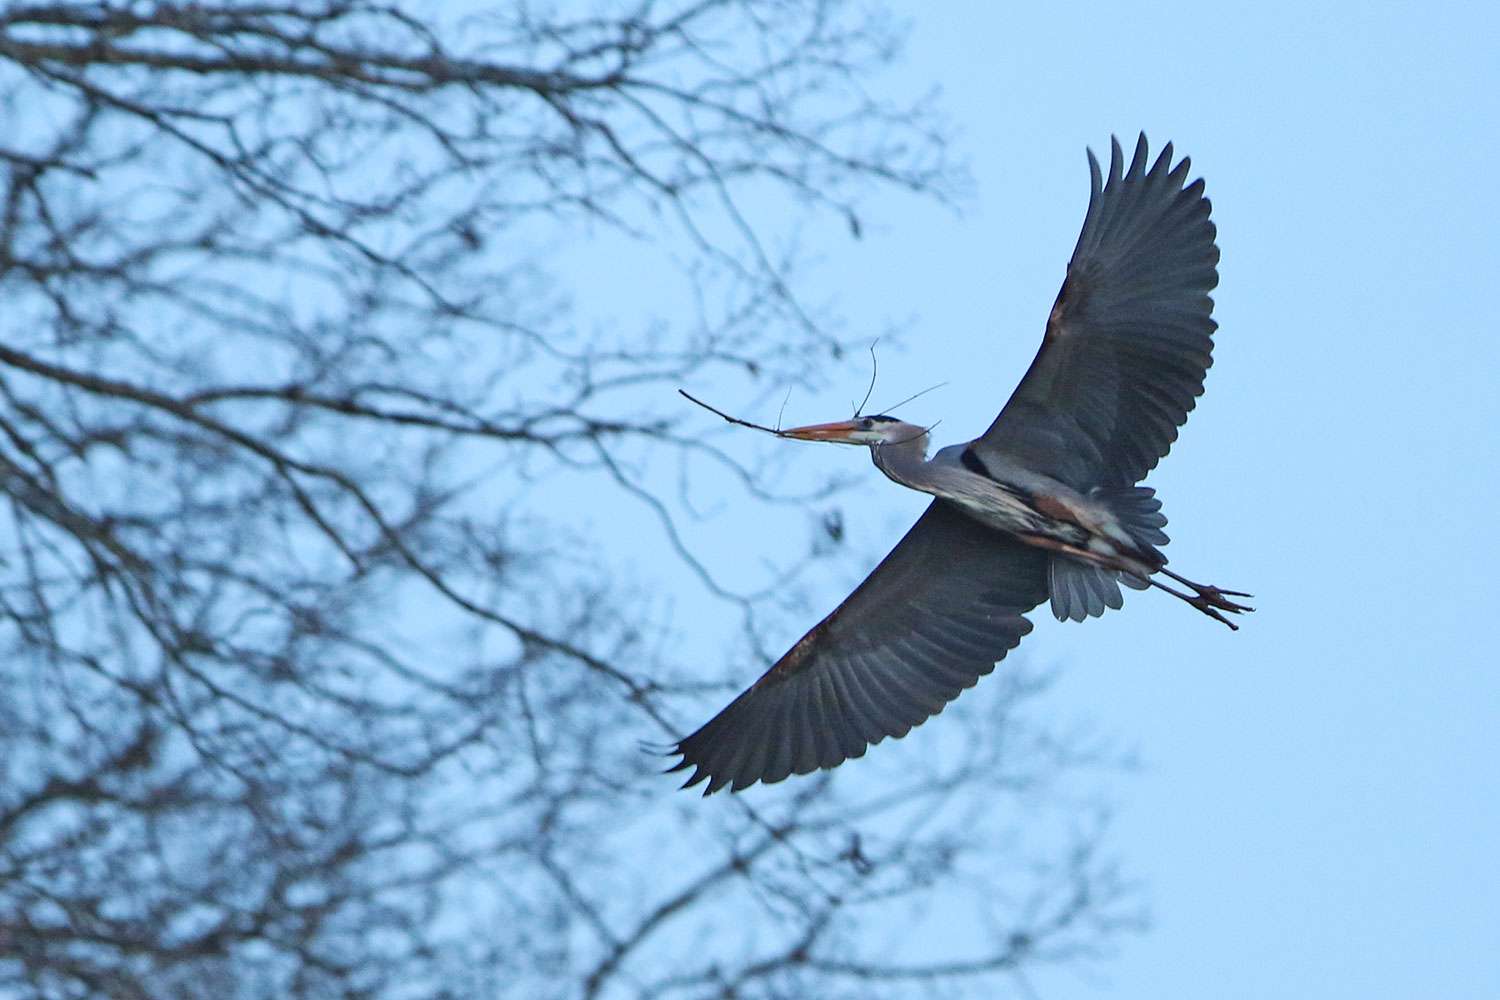 Aside from this cool great blue heron, the following are more running and gunning shots from Day 2 of the 2019 GEICO Bassmaster Classic presented by DICK'S Sporting Goods.